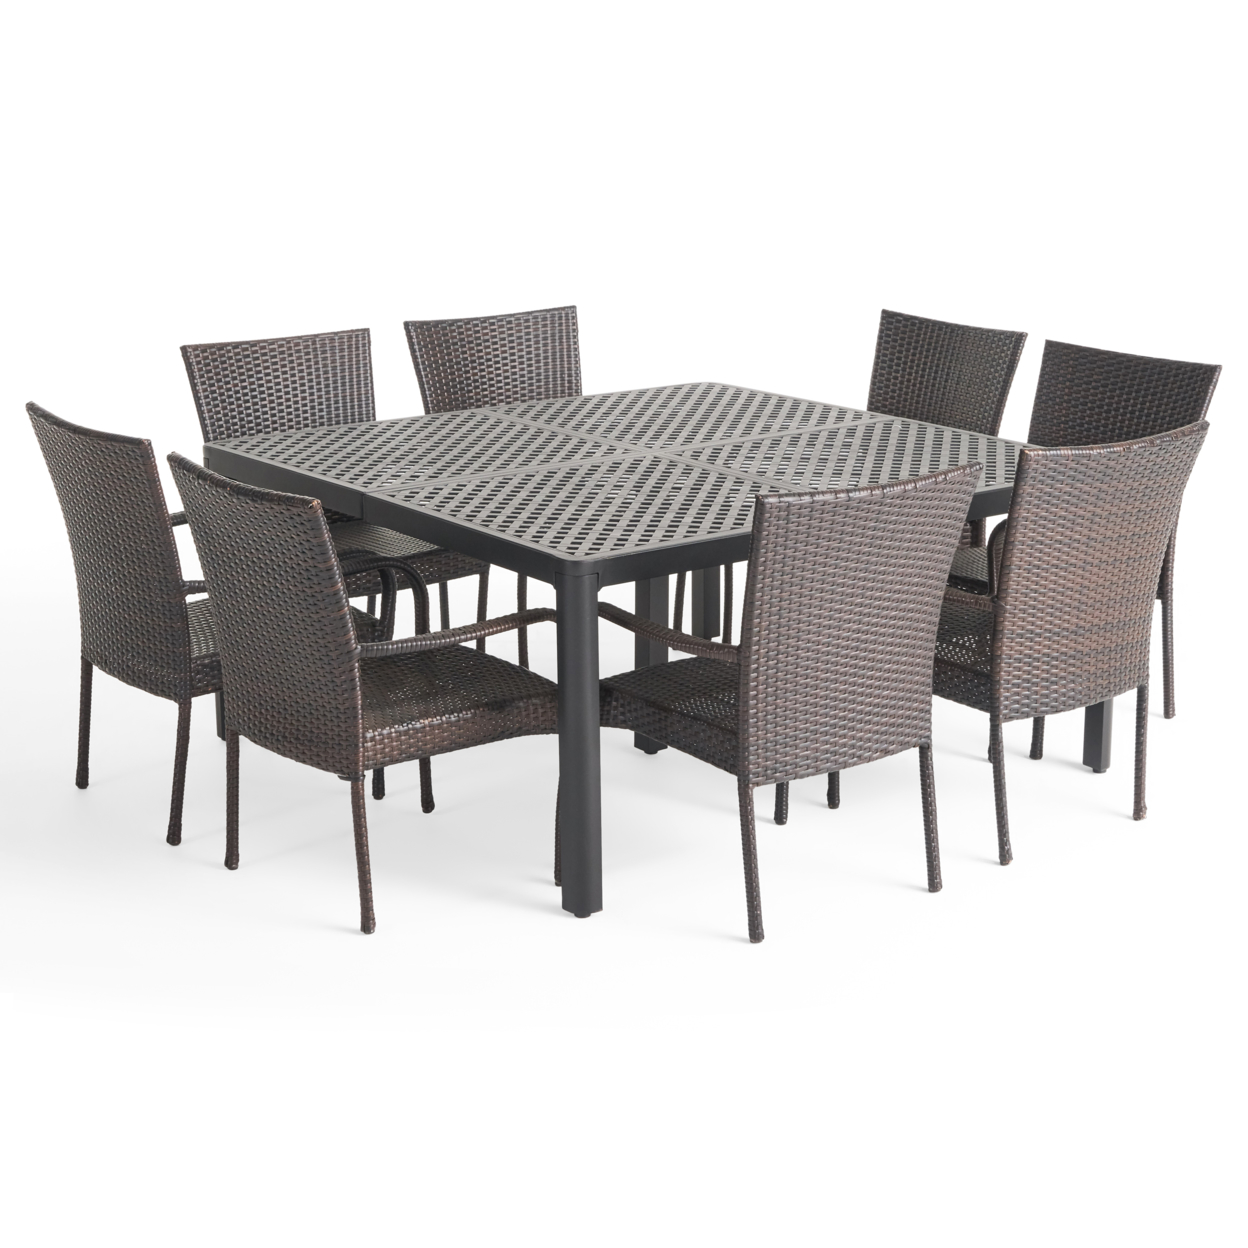 Lillian Outdoor Aluminum And Wicker 8 Seater Dining Set With Stacking Chairs - Antique Matte Black + Multibrown